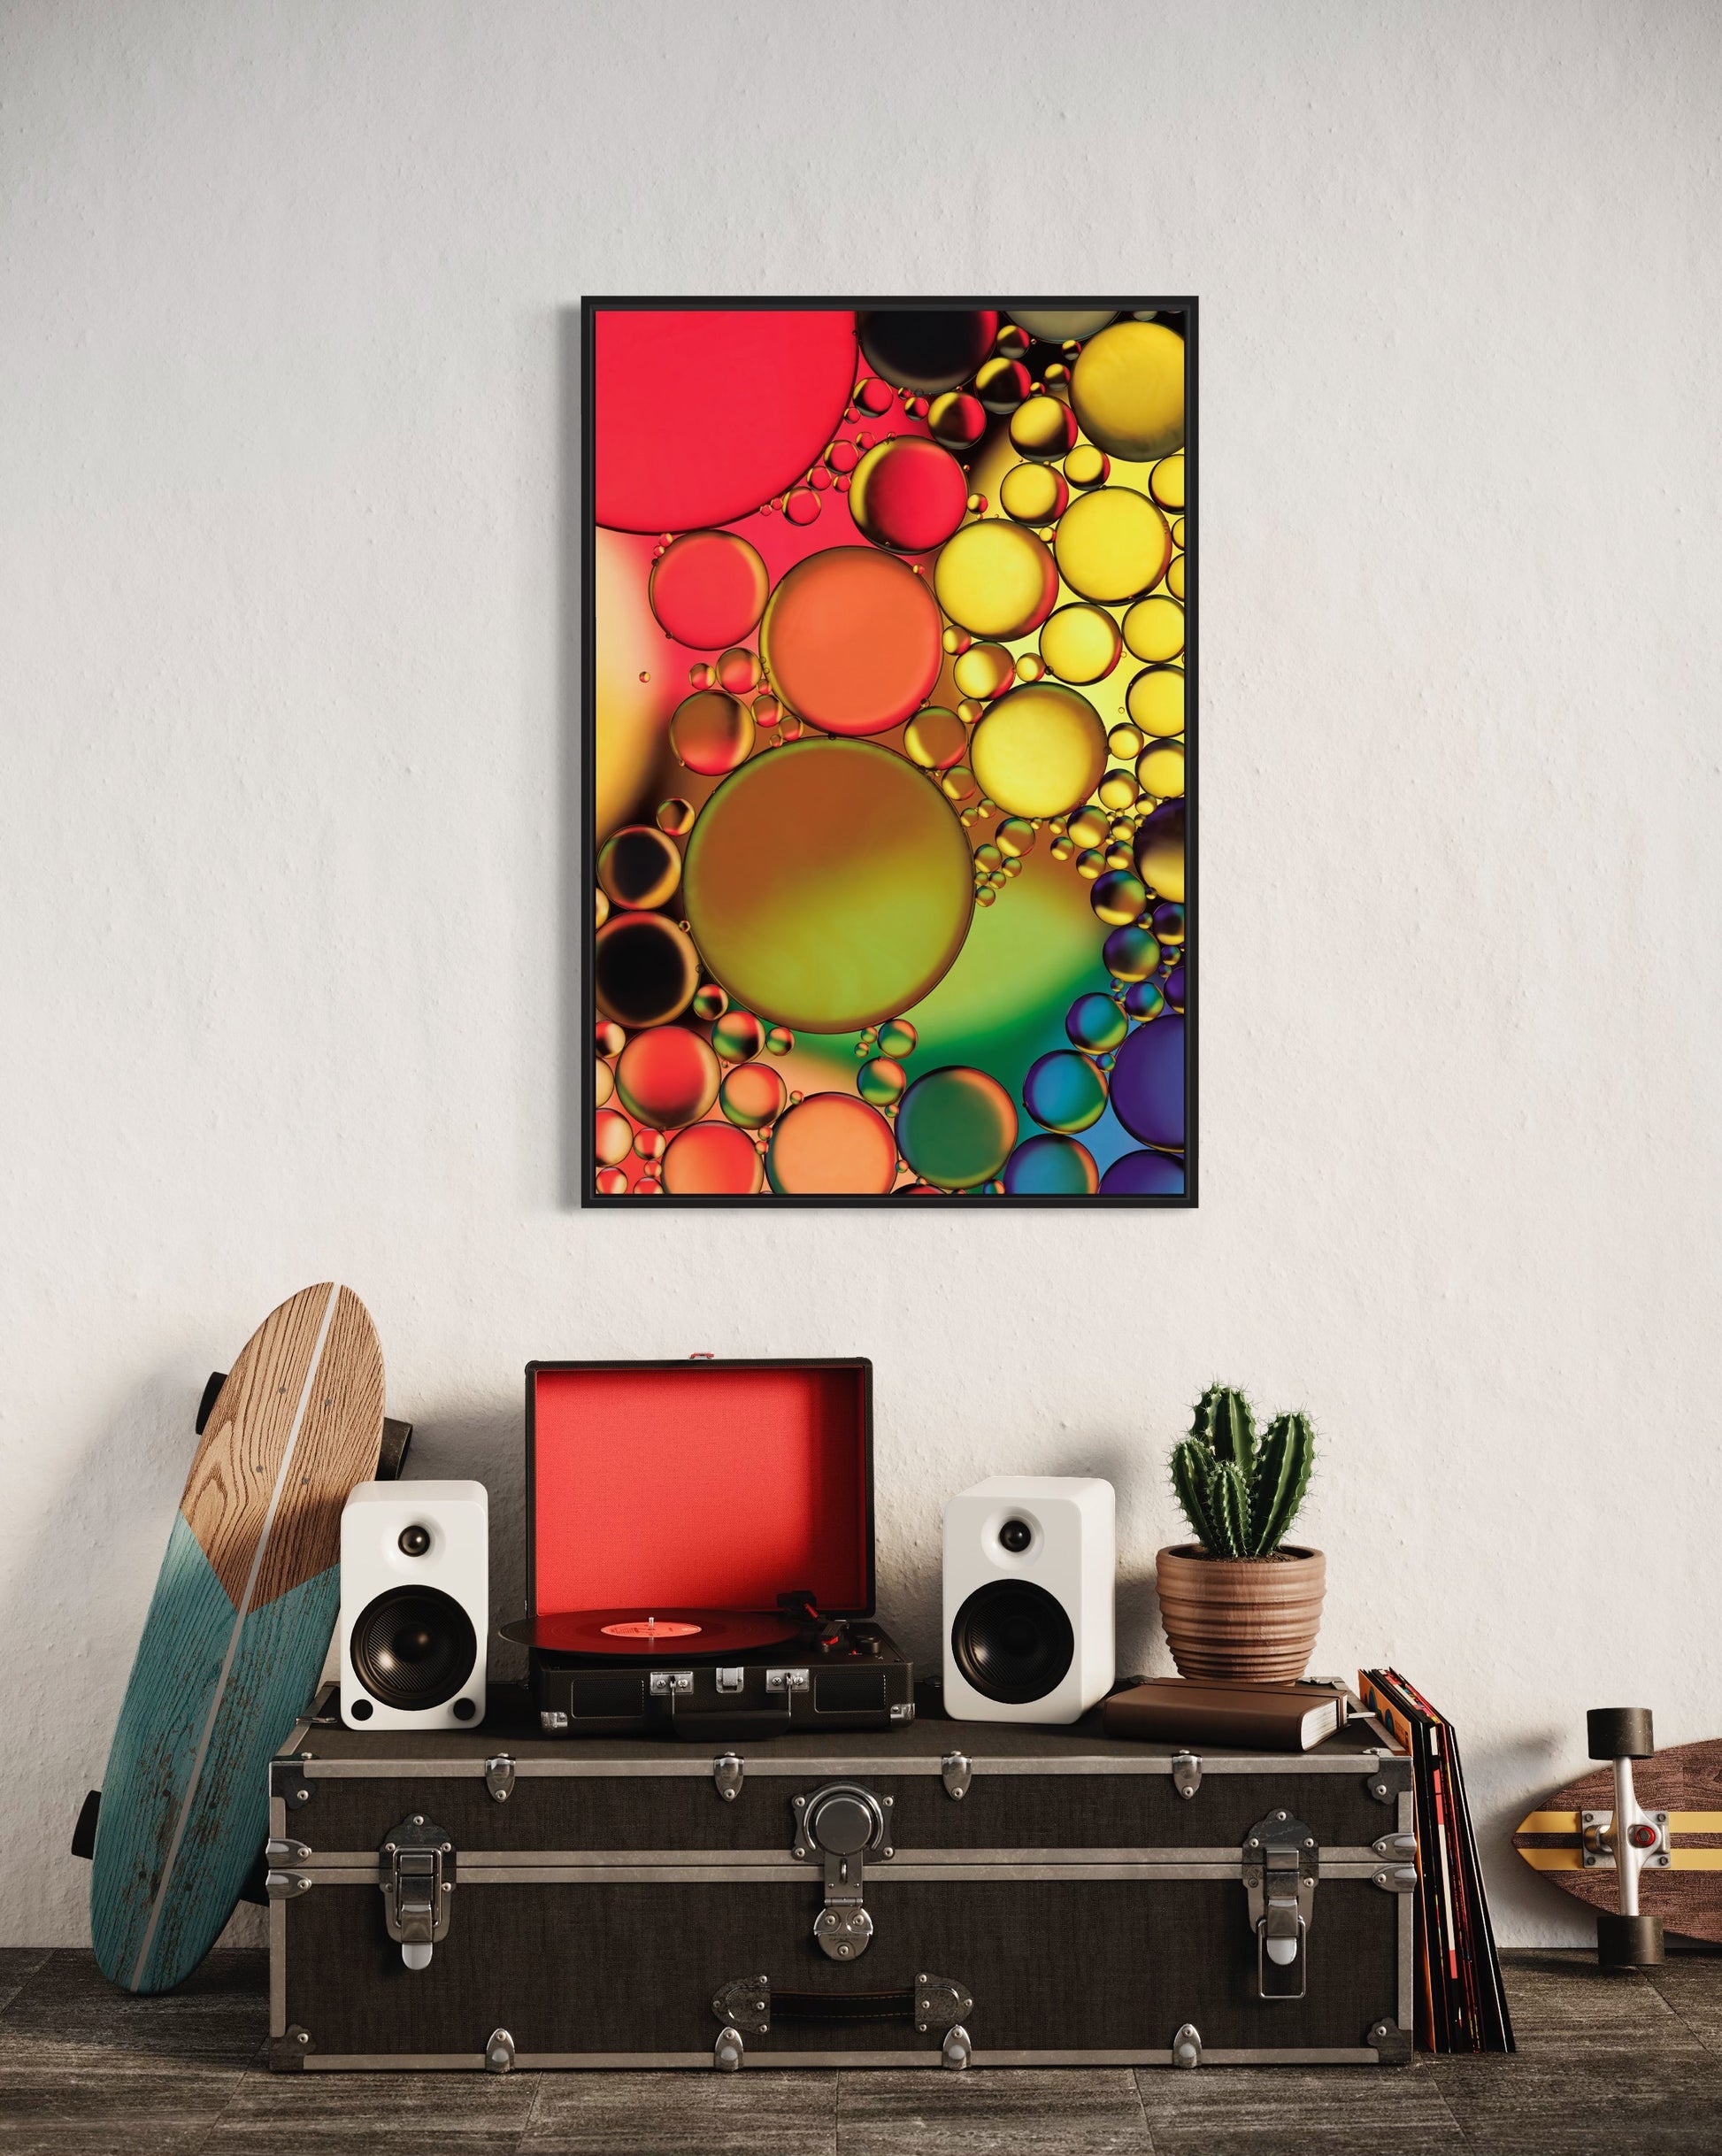 Abstract photograph titled "Jewels" featuring an interplay of oil and water in vibrant orange, yellow, green, blue, and purple hues, printed on high-grade photo paper and mounted under acrylic for depth and clarity. The predominant elements of this image are circular forms and vibrant hues.  The image shows the print hanging over  a trunk displaying a record player, plant and skateboard in a casual manner.